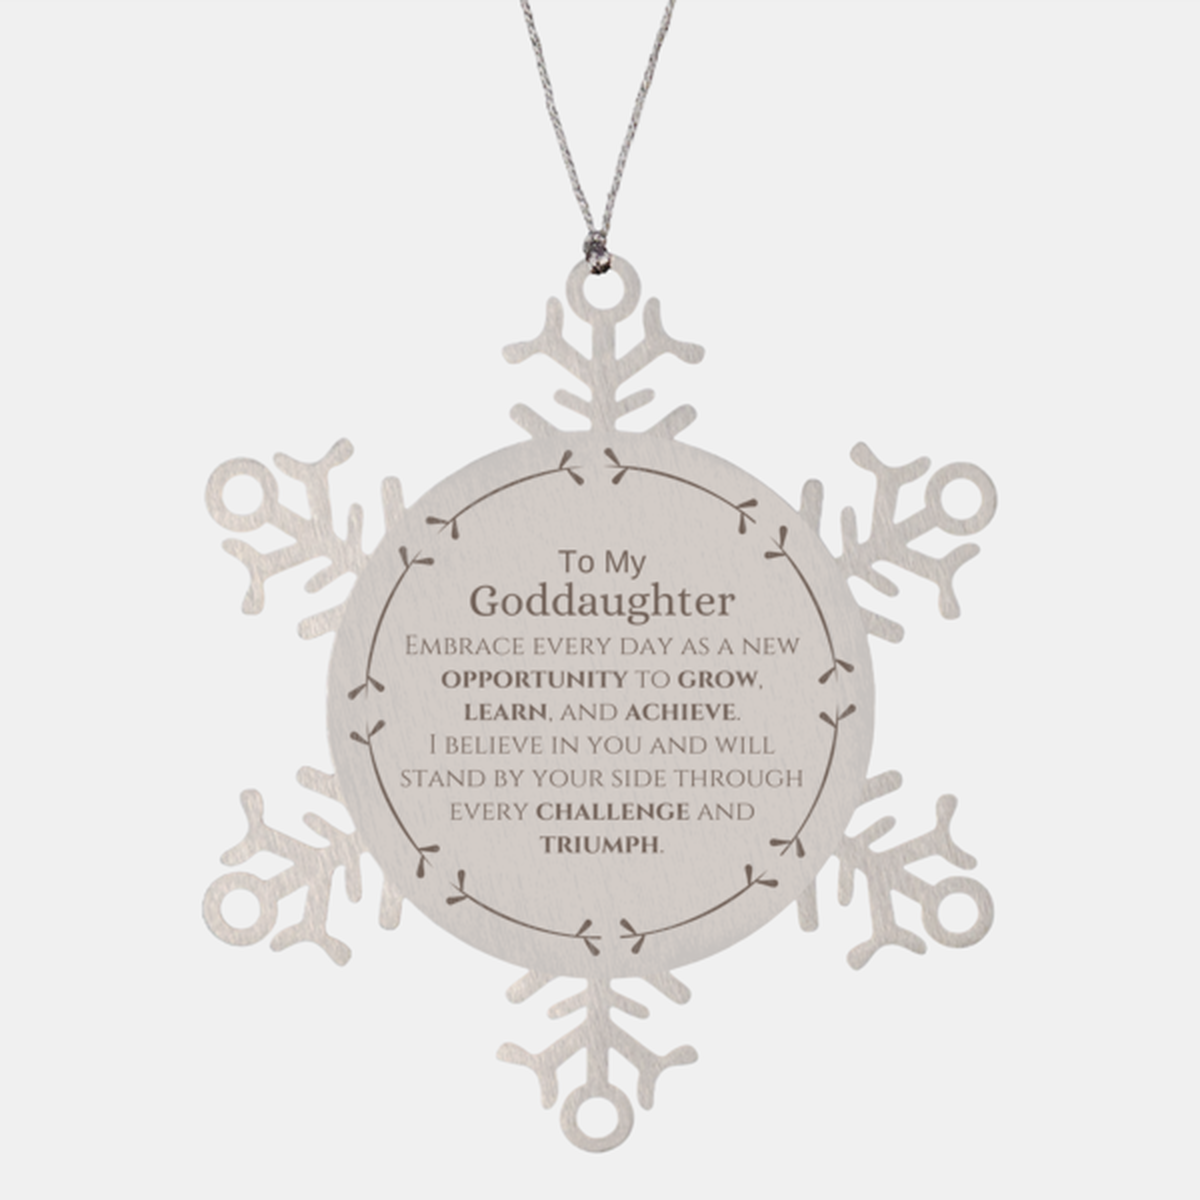 To My Goddaughter Gifts, I believe in you and will stand by your side, Inspirational Snowflake Ornament For Goddaughter, Birthday Christmas Motivational Goddaughter Gifts